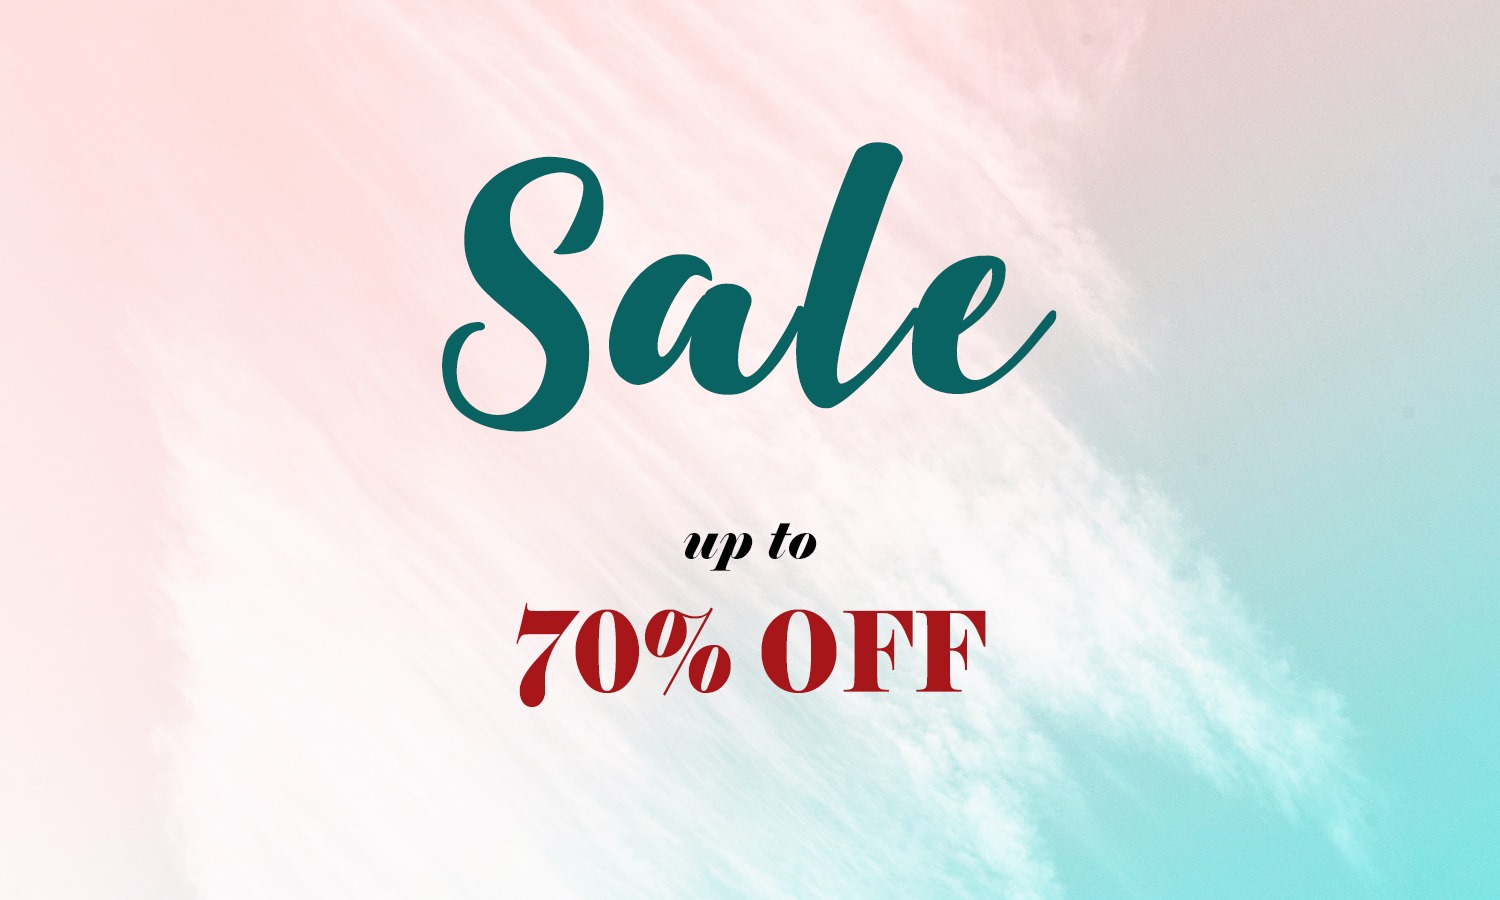 ALEXANDRE ZOUARI's selective items up to 70% OFF! Please be invited to visit our boutiques and online shop. Create the season’s most stylish yet feminine look with French handmade hair accessories! ALEXANDRE ZOUARI 精選貨品低至三折！誠邀您親臨專門店及網上商店選購法國手工制髮飾，塑造時尚優雅風格！ For any updates of AZ:...